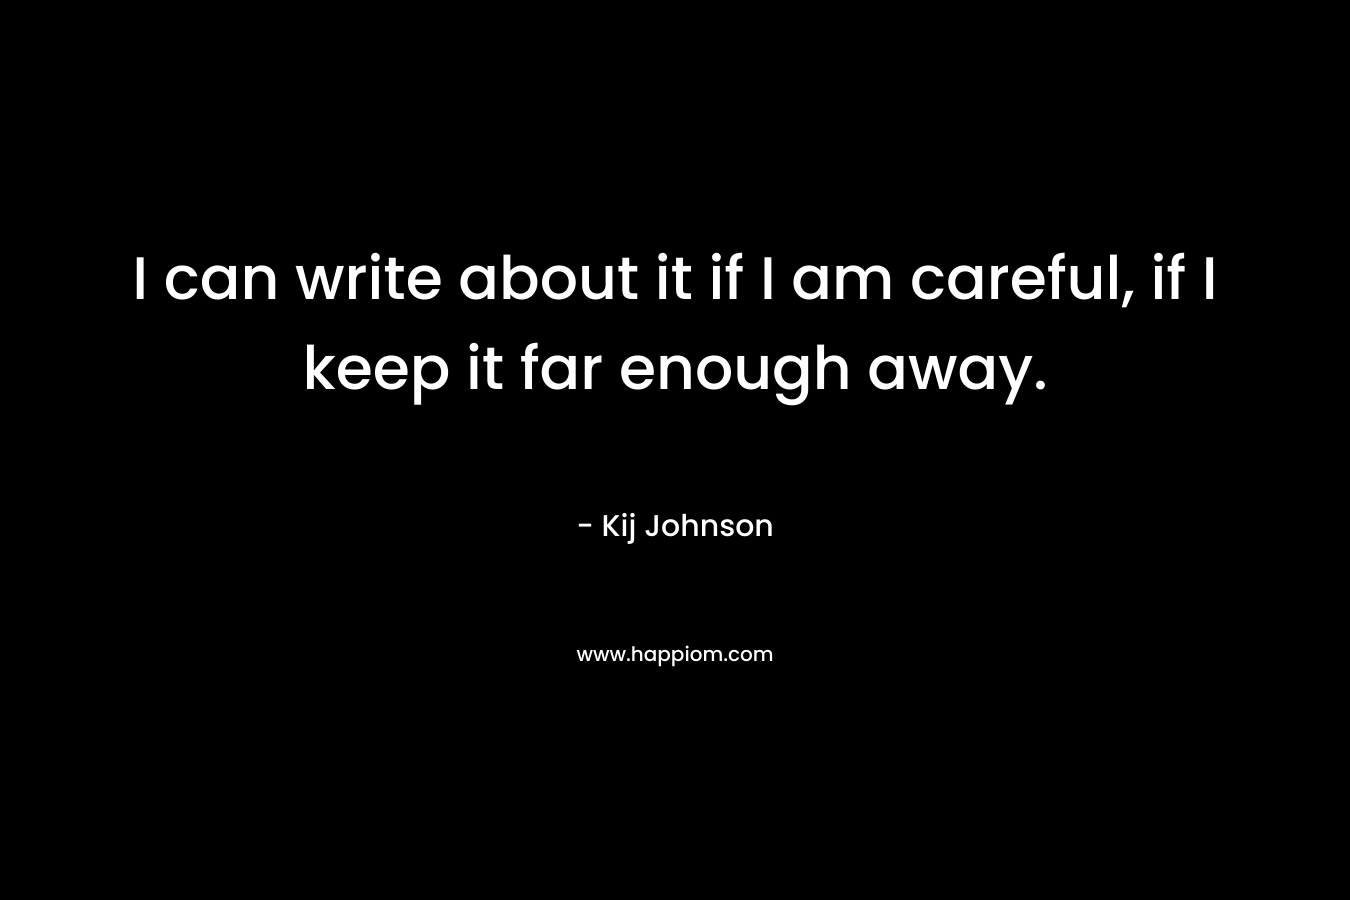 I can write about it if I am careful, if I keep it far enough away.